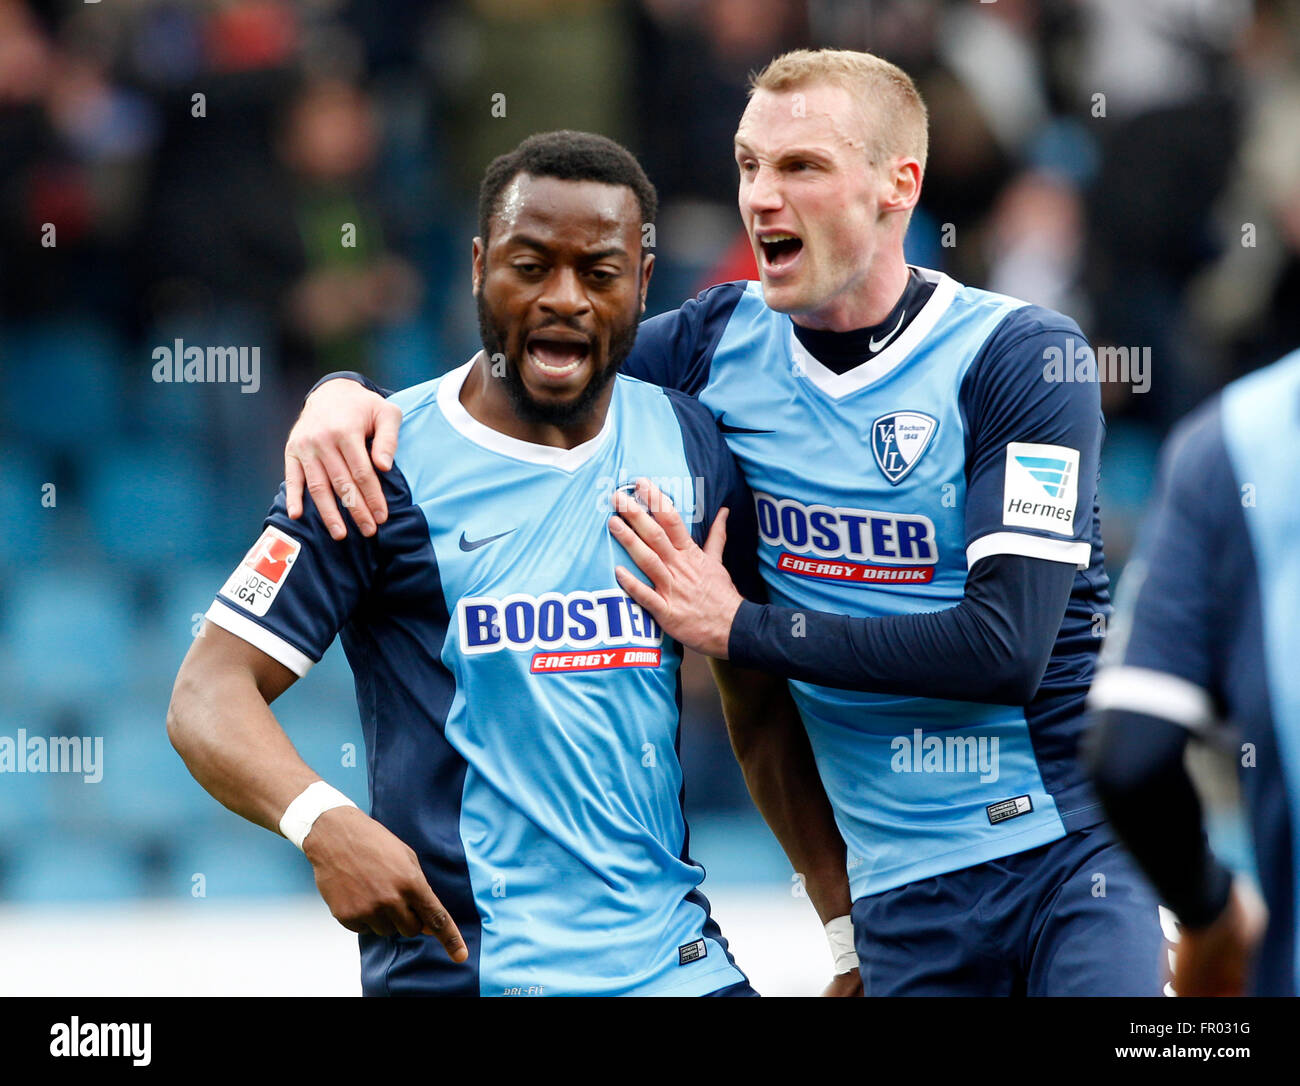 Bochum, Germany. 20th Mar, 2016. Bochum's Nando Rafael (L) celebrates his 2-2 goal with teammate Felix Bastians during the German second division Bundesliga soccer match between VfL Bochum and SpVgg Greuther Fuerth at rewirpowerSTADION in Bochum, Germany, 20 March 2016. Photo: ROLAND WEIHRAUCH/dpa/Alamy Live News Stock Photo